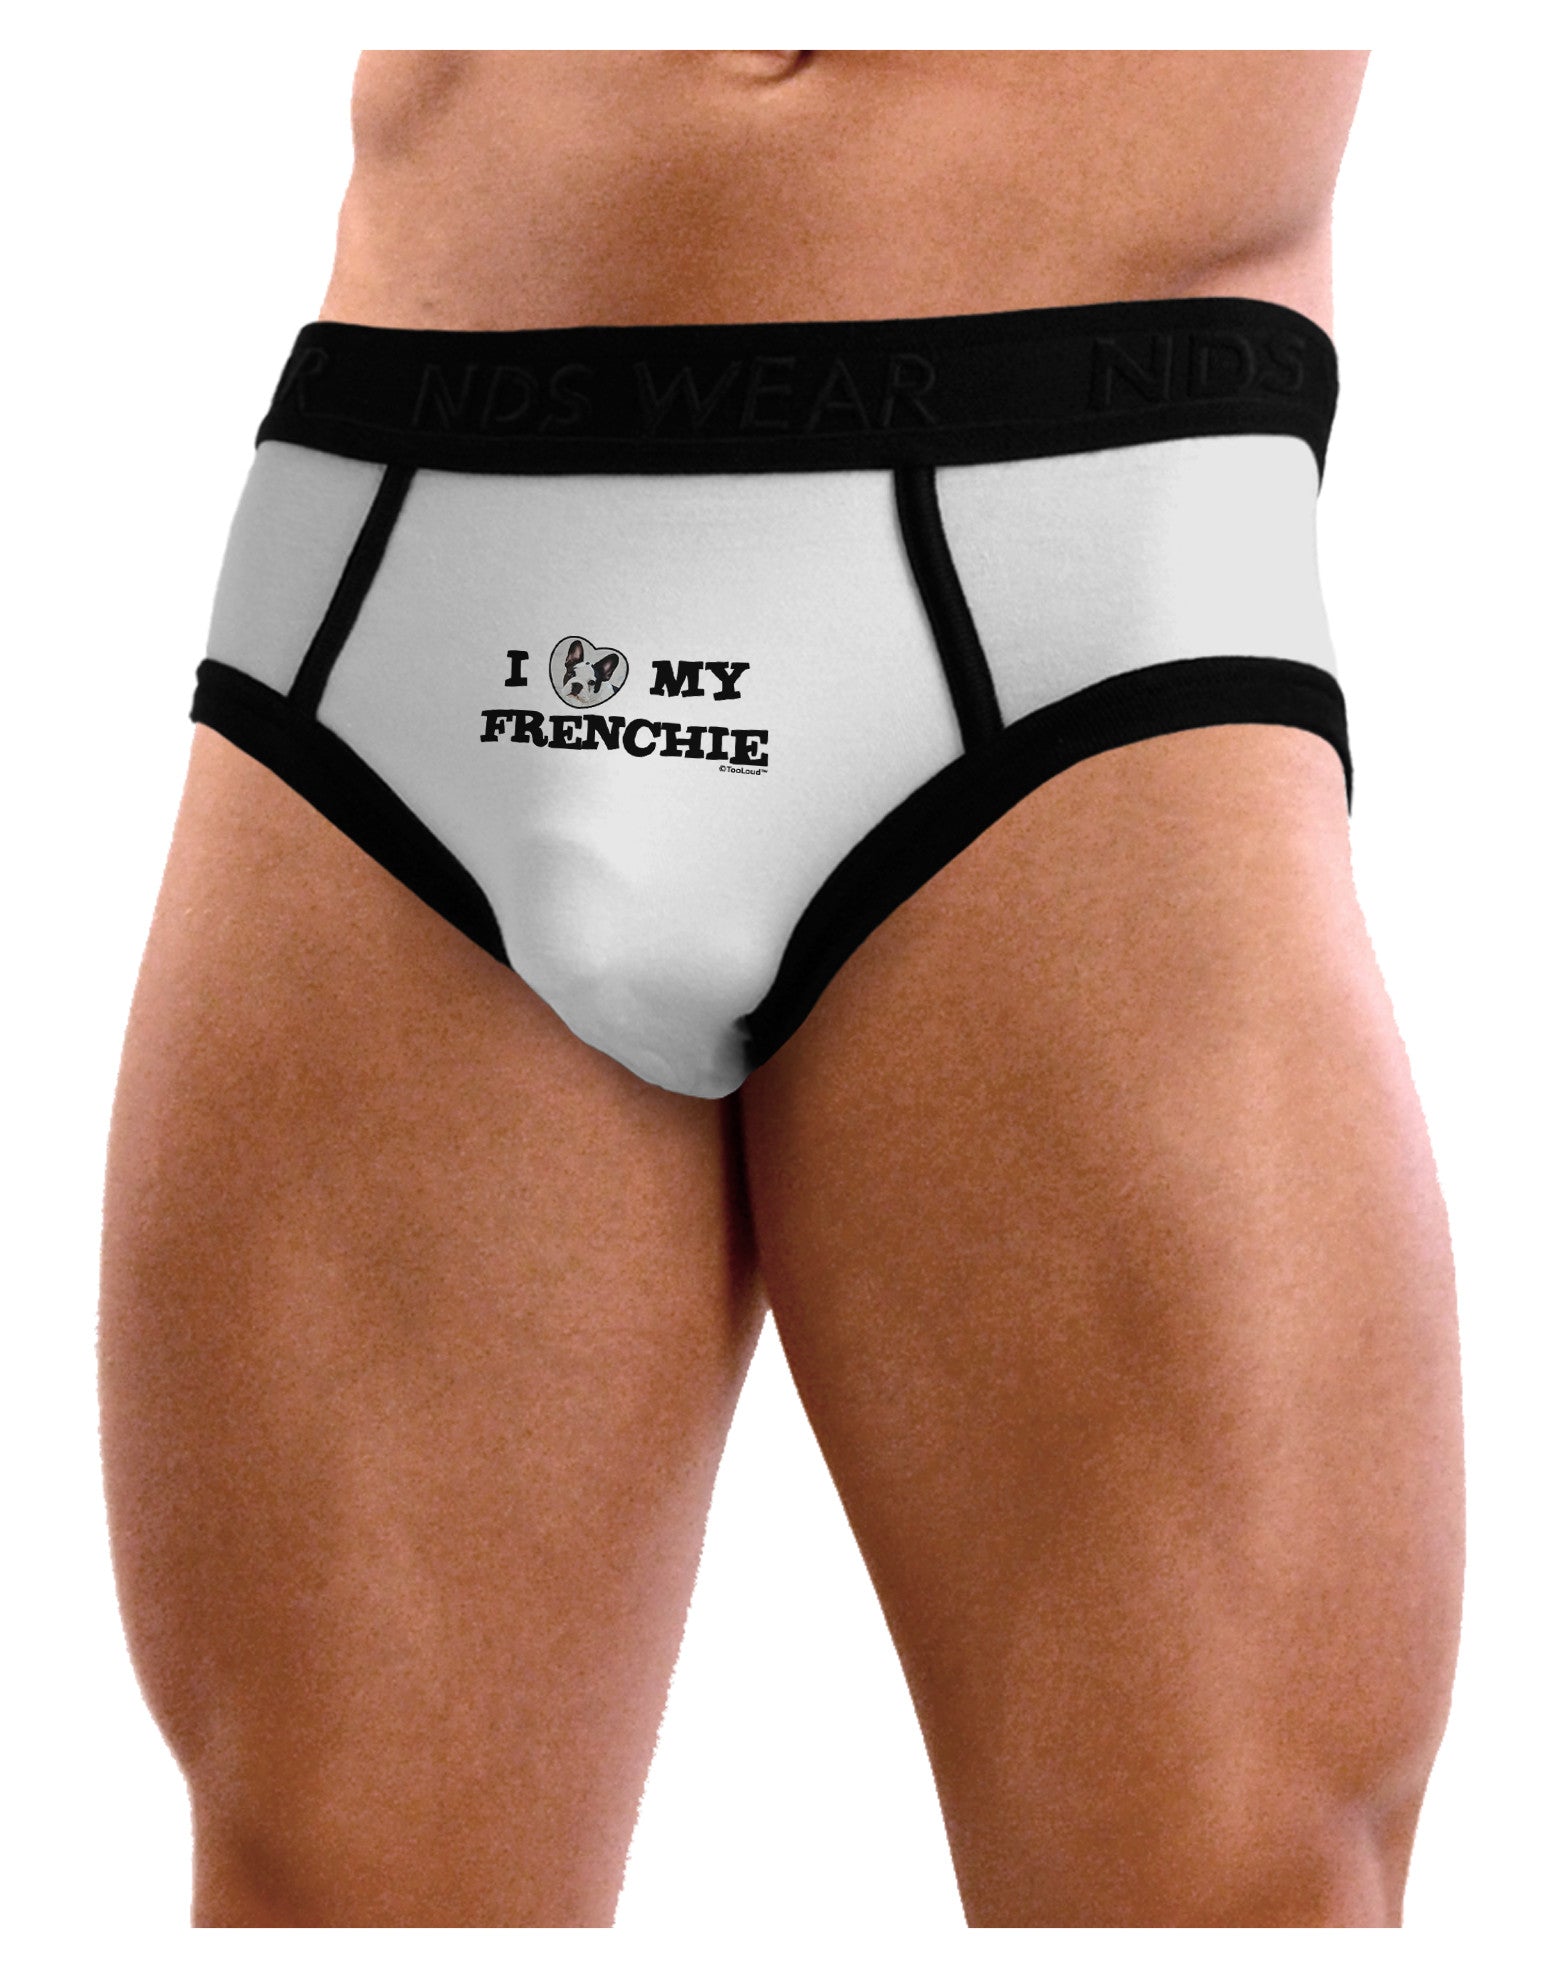 I Heart My Frenchie Mens NDS Wear Briefs Underwear by TooLoud